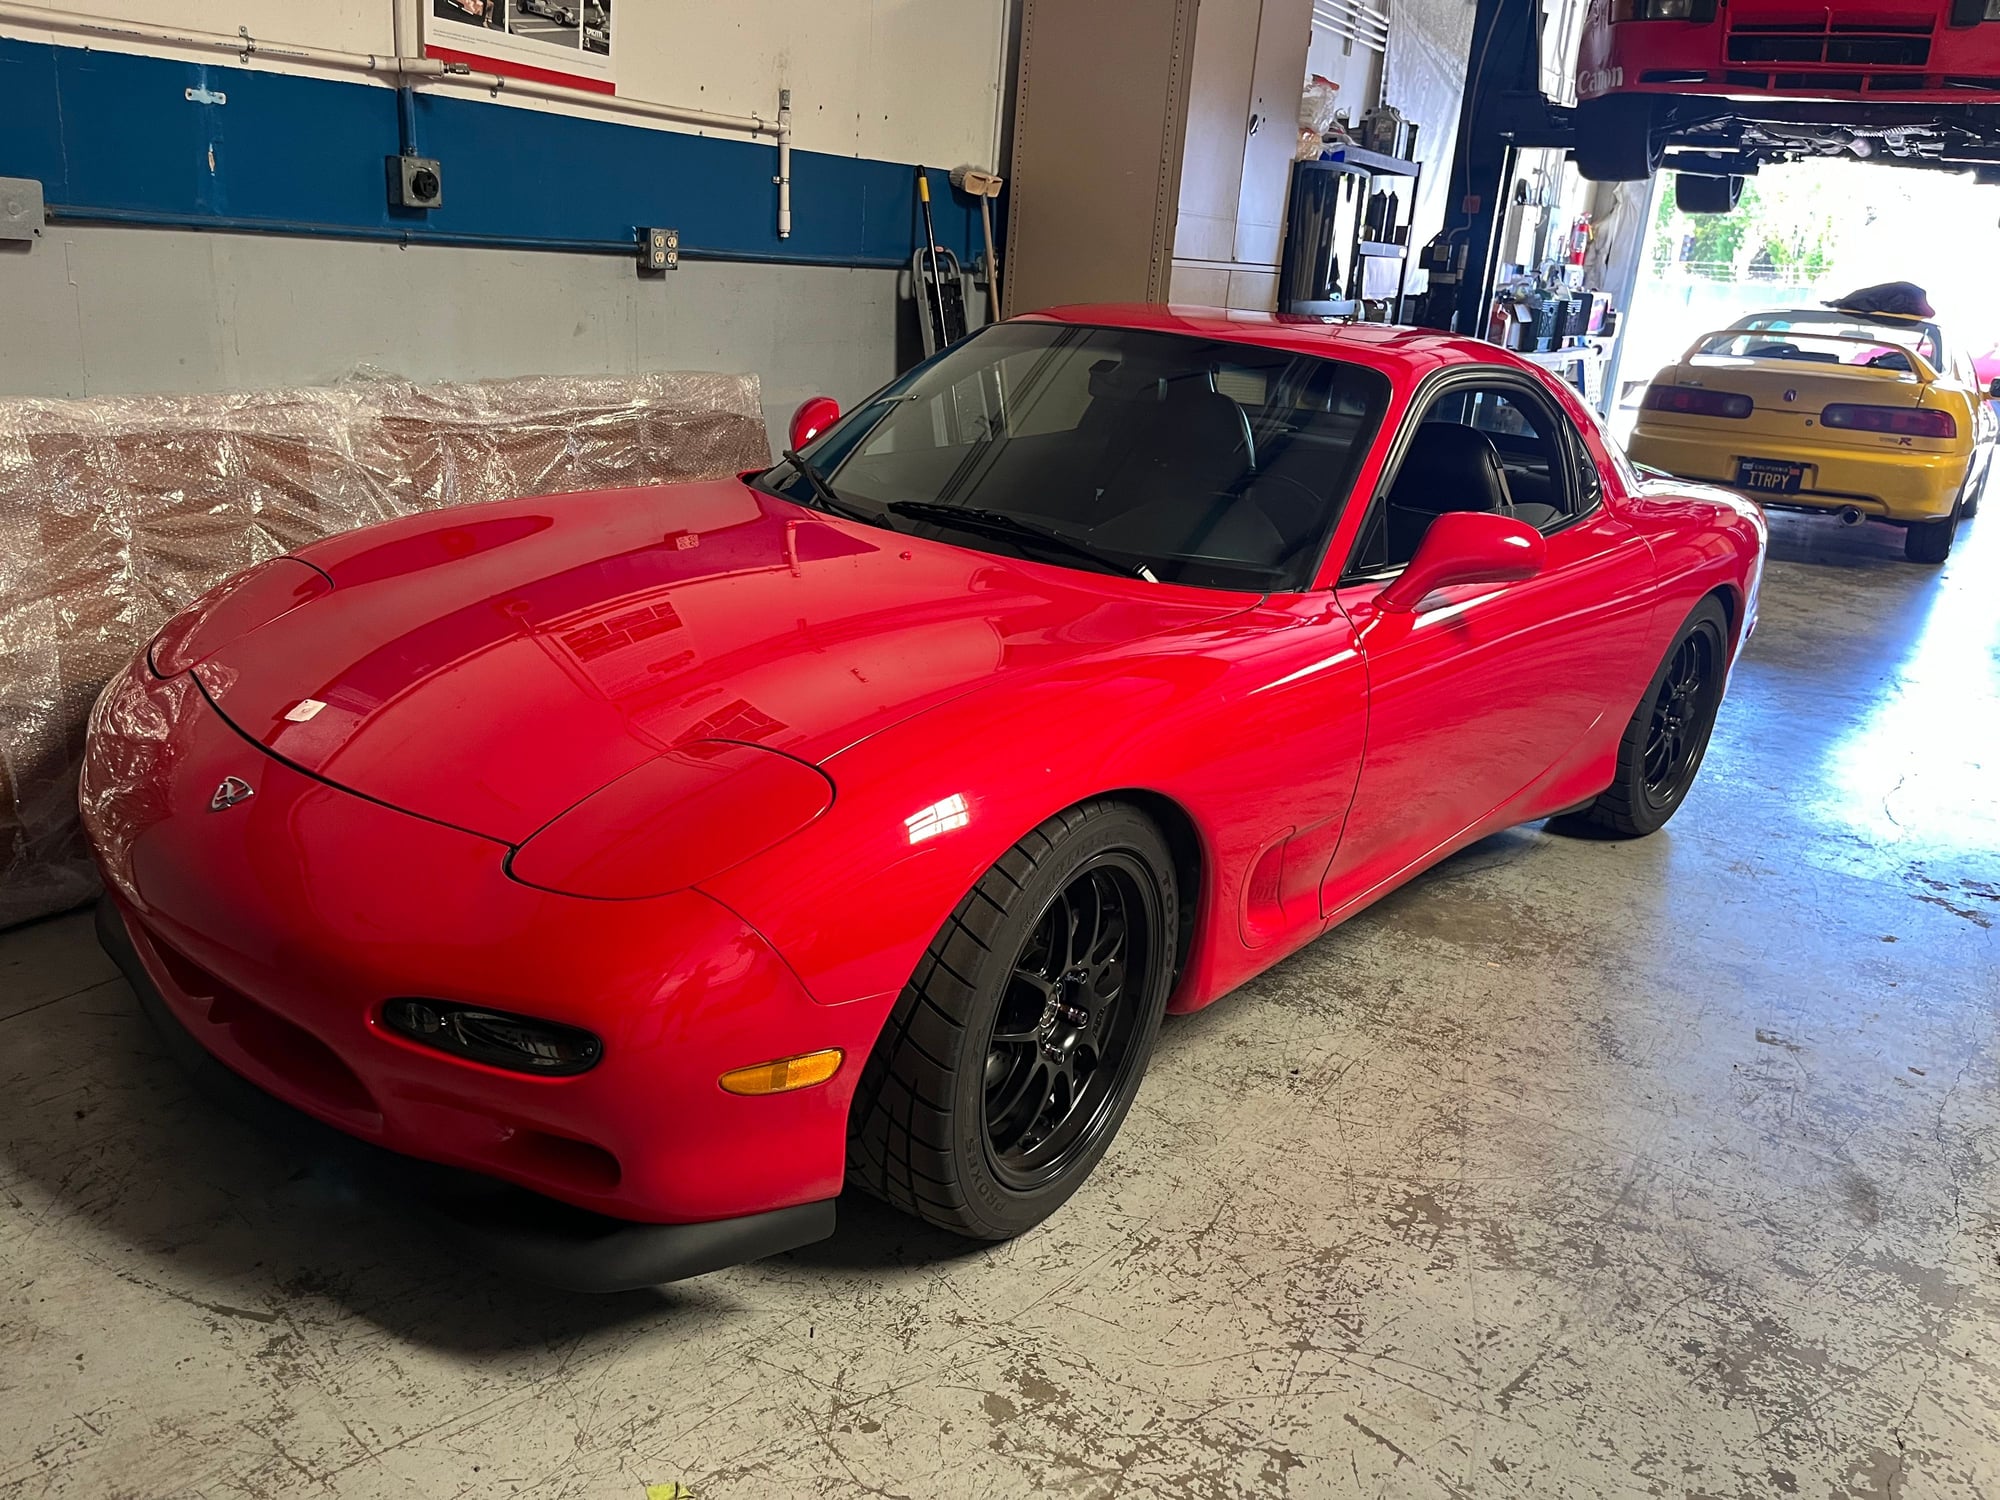 1994 Mazda RX-7 - 1994 Mazda RX-7 - Used - VIN JM1FD3338R0303241 - 77,000 Miles - 2WD - Manual - Red - Mill Valley, CA 94941, United States